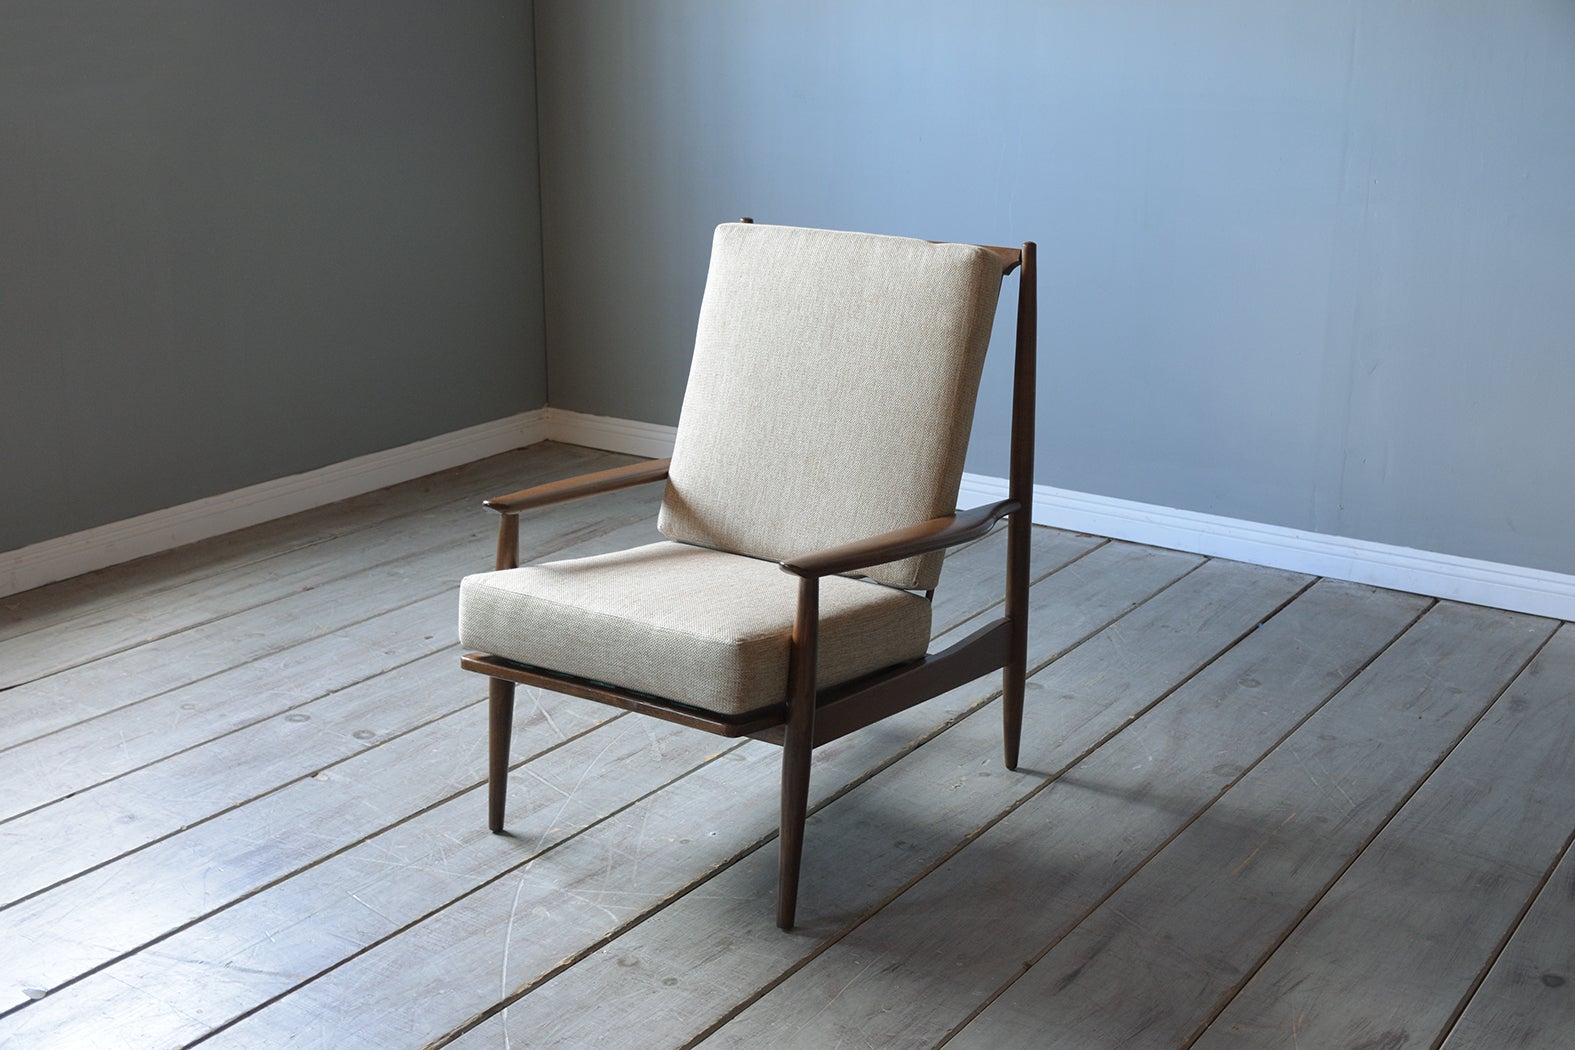 This vintage 1960s mid-century modern upholstered lounge chair is crafted out of walnut wood with the original rich walnut color stain with a polished finish and has been completely restored by our team of expert craftsmen. The chair frame features